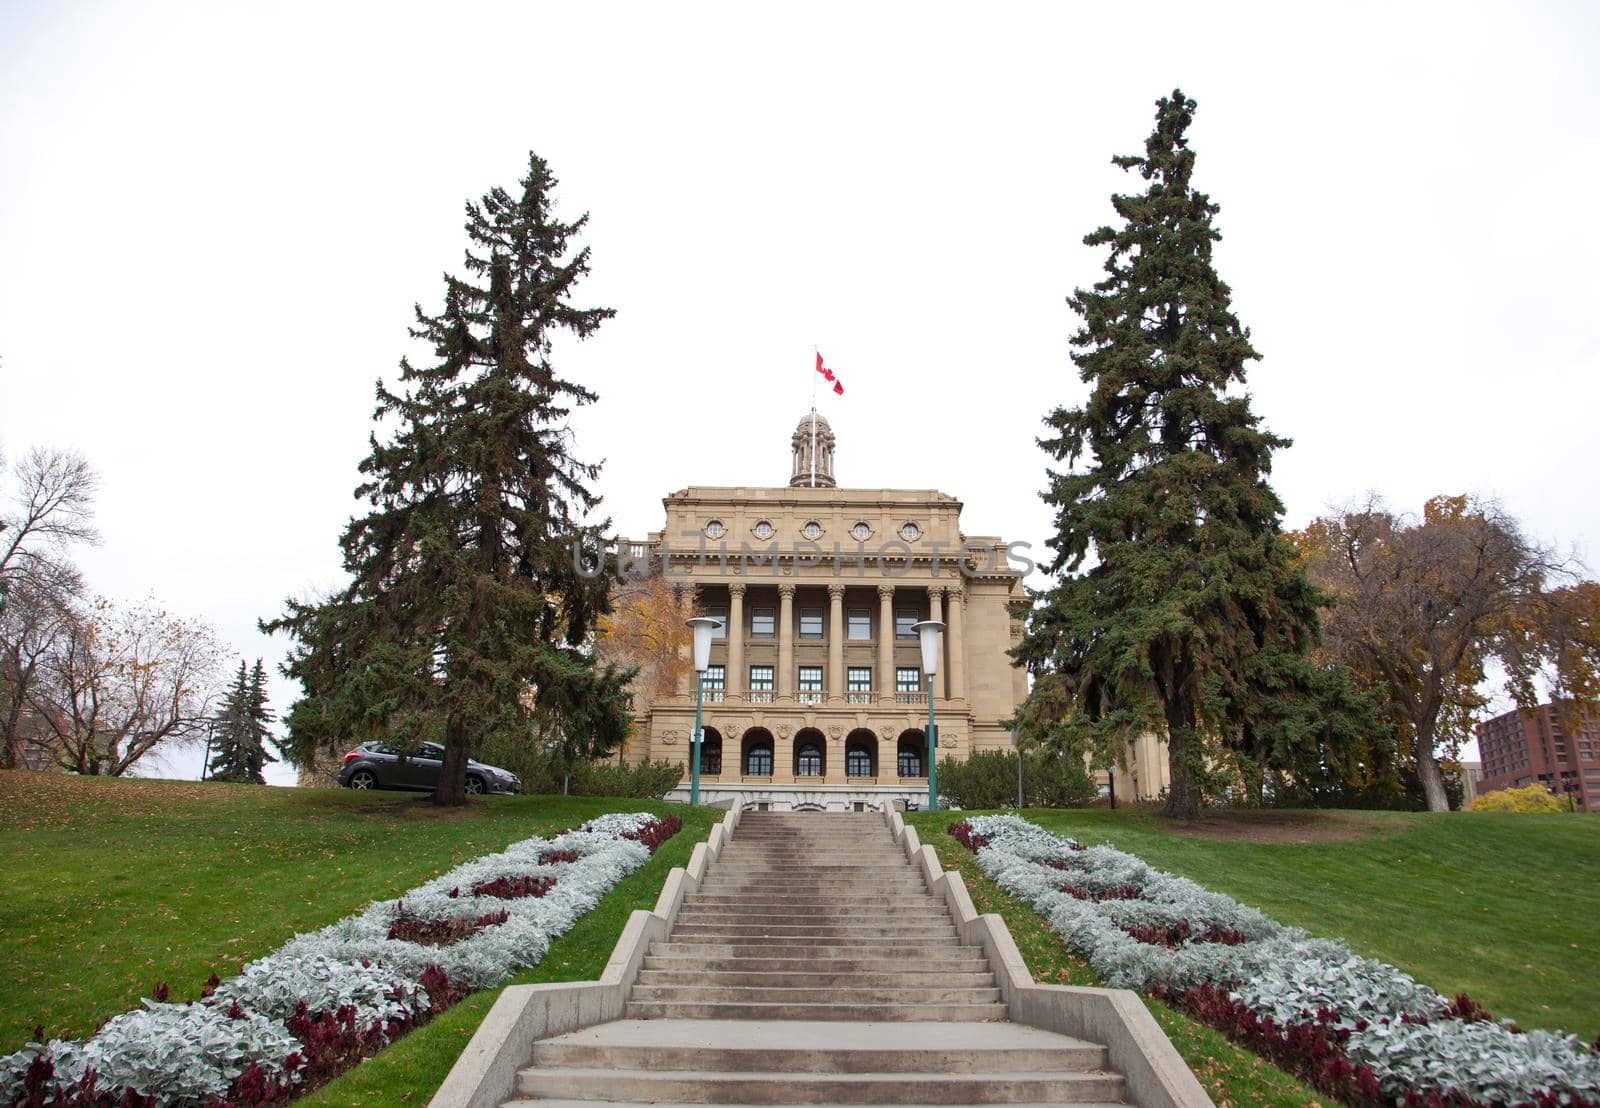  on October 6, 2017: the alberta legislature building and grounds